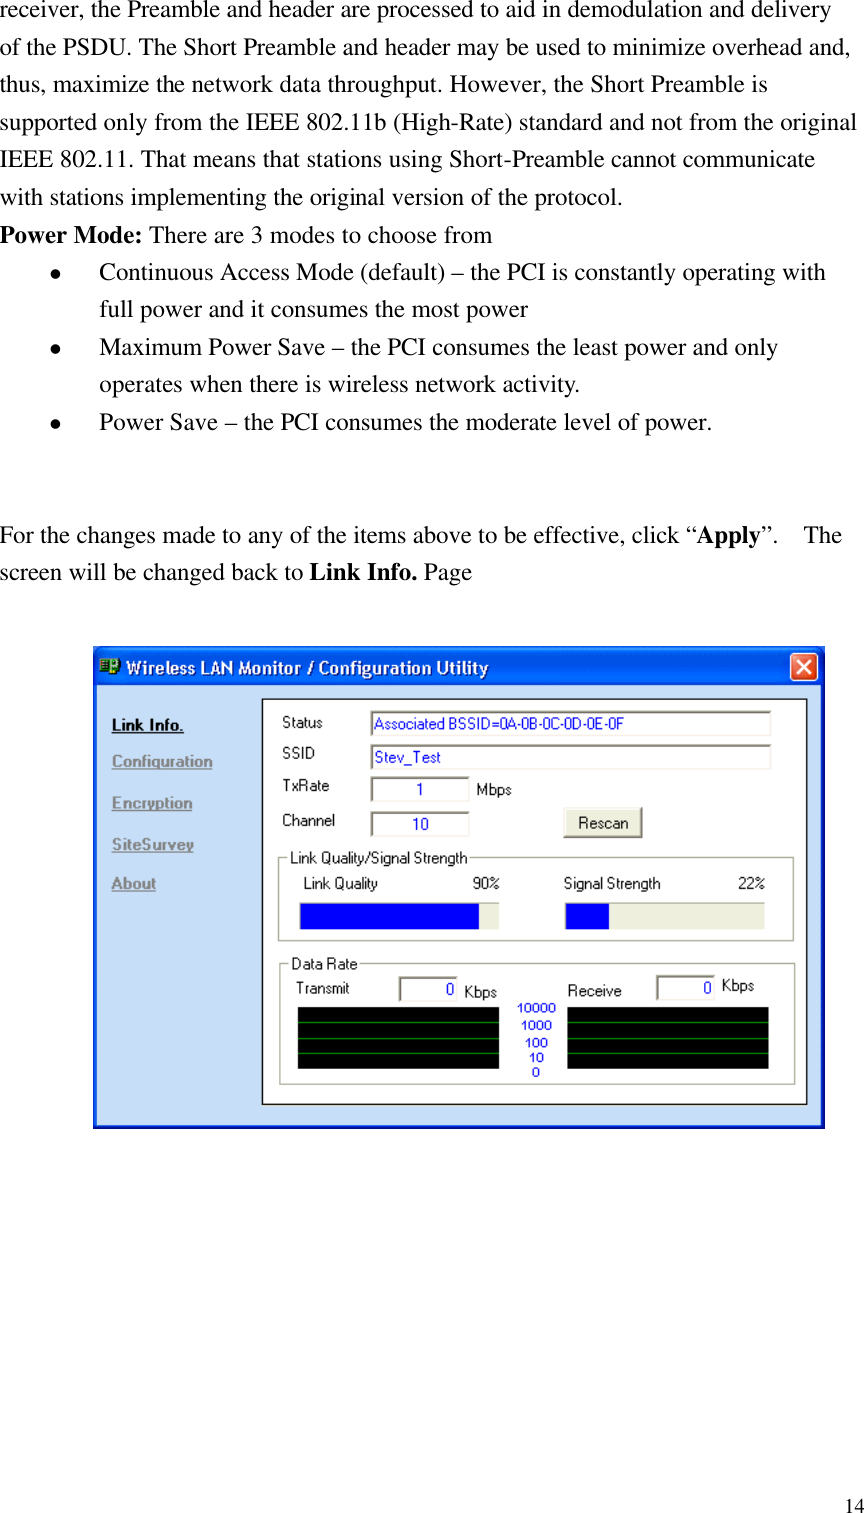  14receiver, the Preamble and header are processed to aid in demodulation and delivery of the PSDU. The Short Preamble and header may be used to minimize overhead and, thus, maximize the network data throughput. However, the Short Preamble is supported only from the IEEE 802.11b (High-Rate) standard and not from the original IEEE 802.11. That means that stations using Short-Preamble cannot communicate with stations implementing the original version of the protocol. Power Mode: There are 3 modes to choose from l Continuous Access Mode (default) – the PCI is constantly operating with full power and it consumes the most power   l Maximum Power Save – the PCI consumes the least power and only operates when there is wireless network activity. l Power Save – the PCI consumes the moderate level of power.   For the changes made to any of the items above to be effective, click “Apply”.  The screen will be changed back to Link Info. Page               